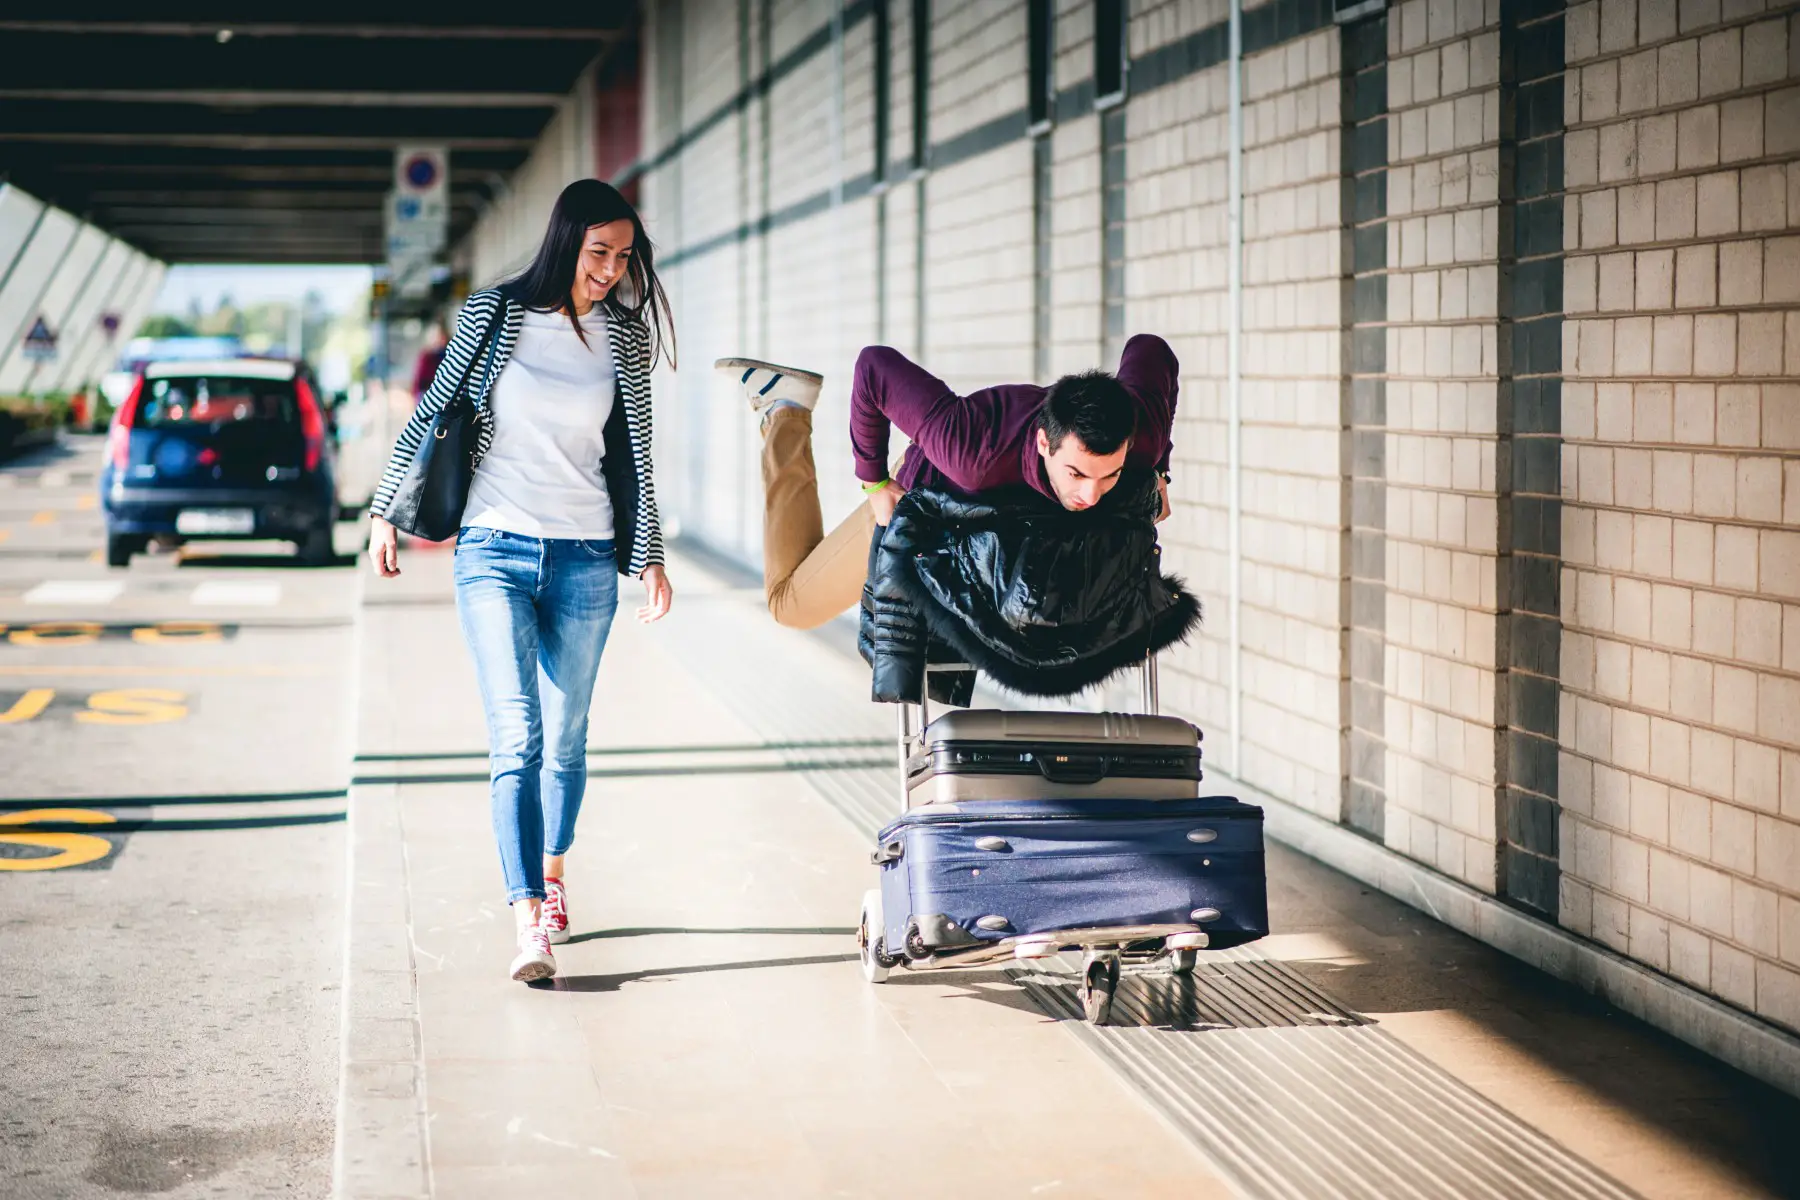 Young couple walking with a trolley and two suitcases at the airport, the woman is laughing while the man is acting silly.